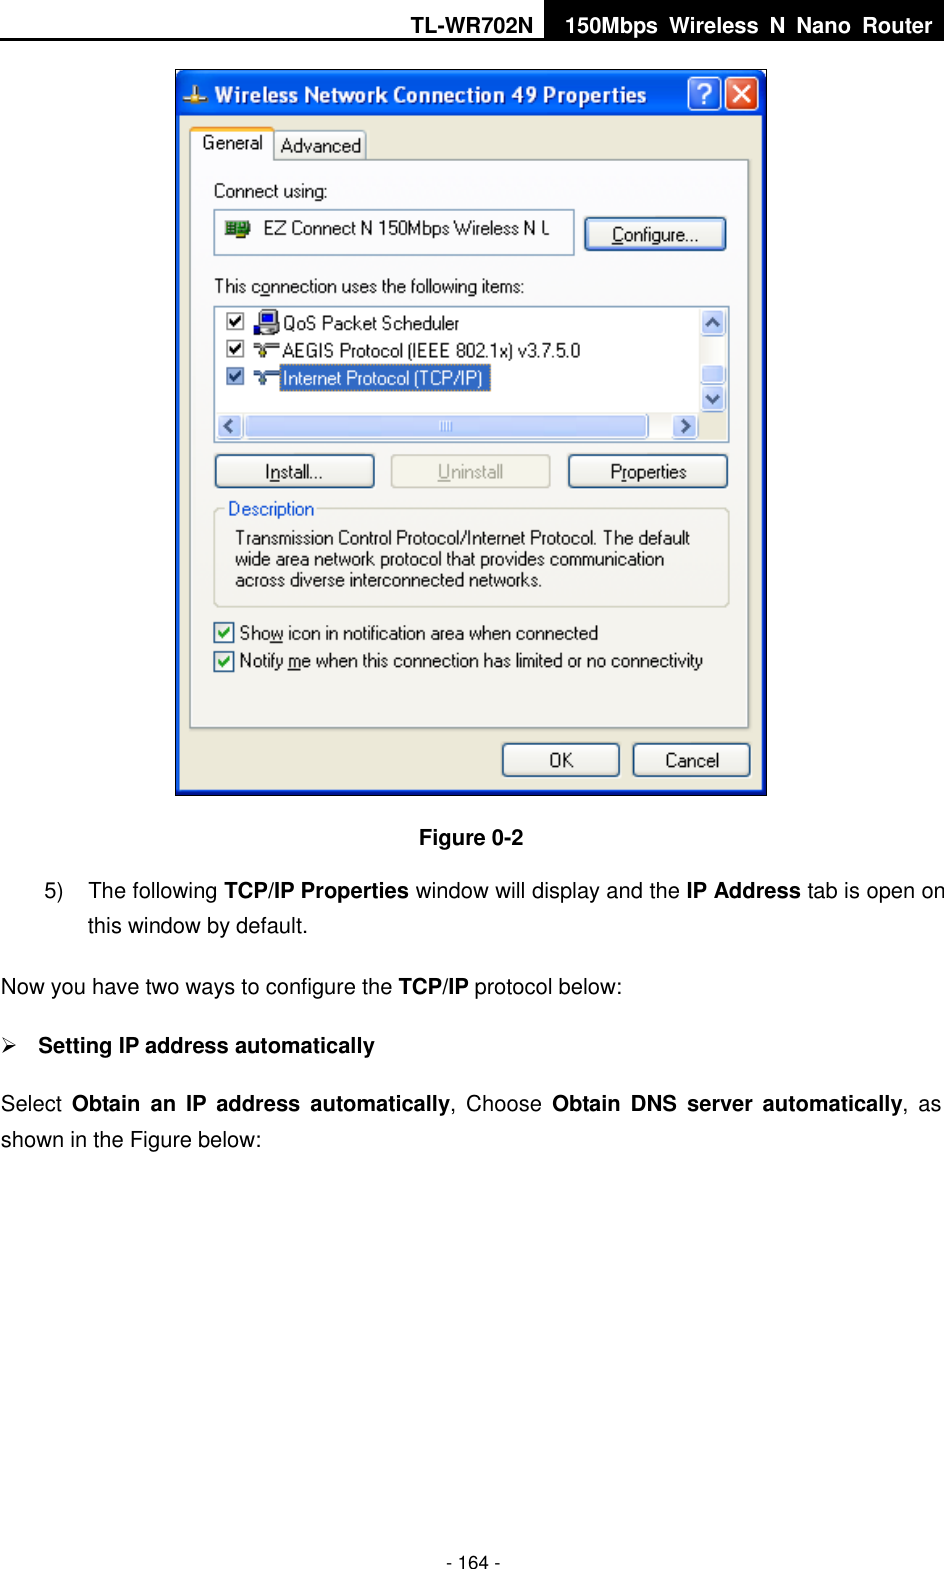 TL-WR702N 150Mbps  Wireless  N  Nano  Router  - 164 -  Figure 0-2 5)  The following TCP/IP Properties window will display and the IP Address tab is open on this window by default. Now you have two ways to configure the TCP/IP protocol below:  Setting IP address automatically Select  Obtain  an  IP  address  automatically,  Choose  Obtain DNS  server  automatically,  as shown in the Figure below: 